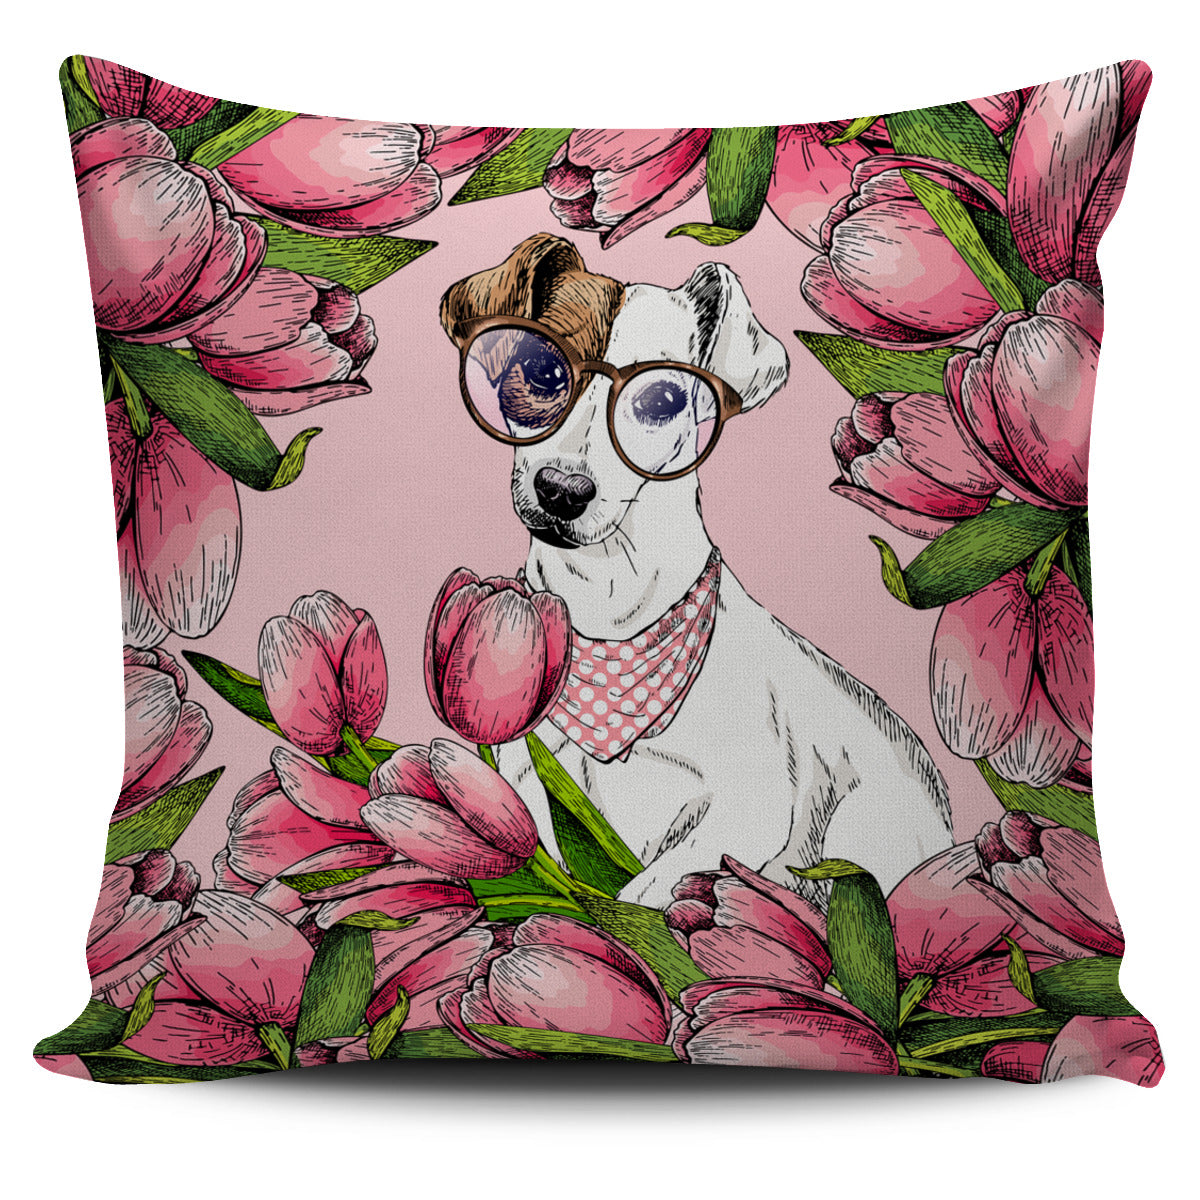 Goofy Jack Russell Terrier Pillow Cover